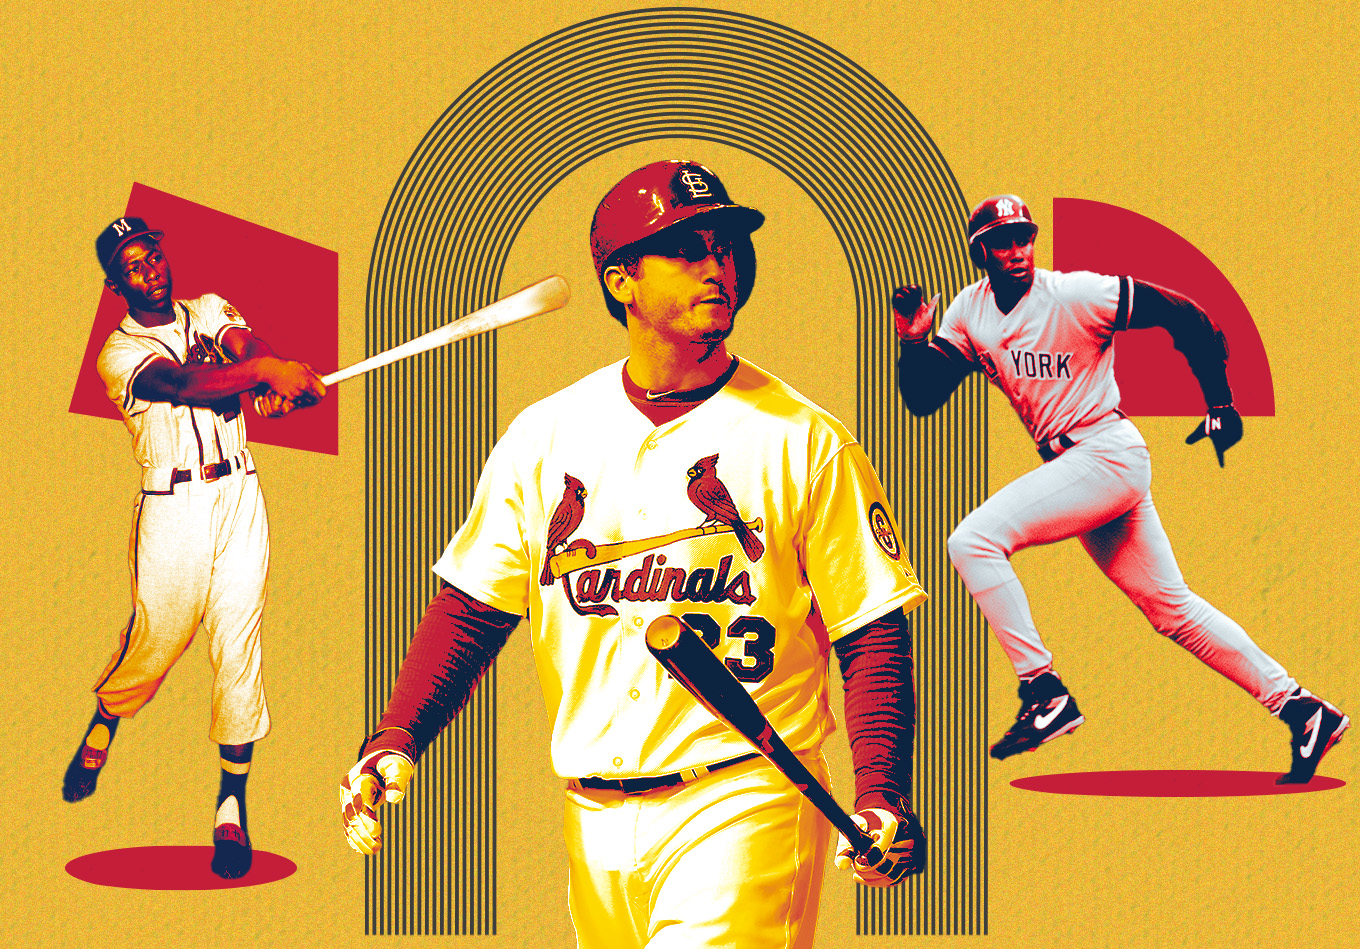 Driving ’em Home: The Most RBIs in a Game, Season and Career in MLB History